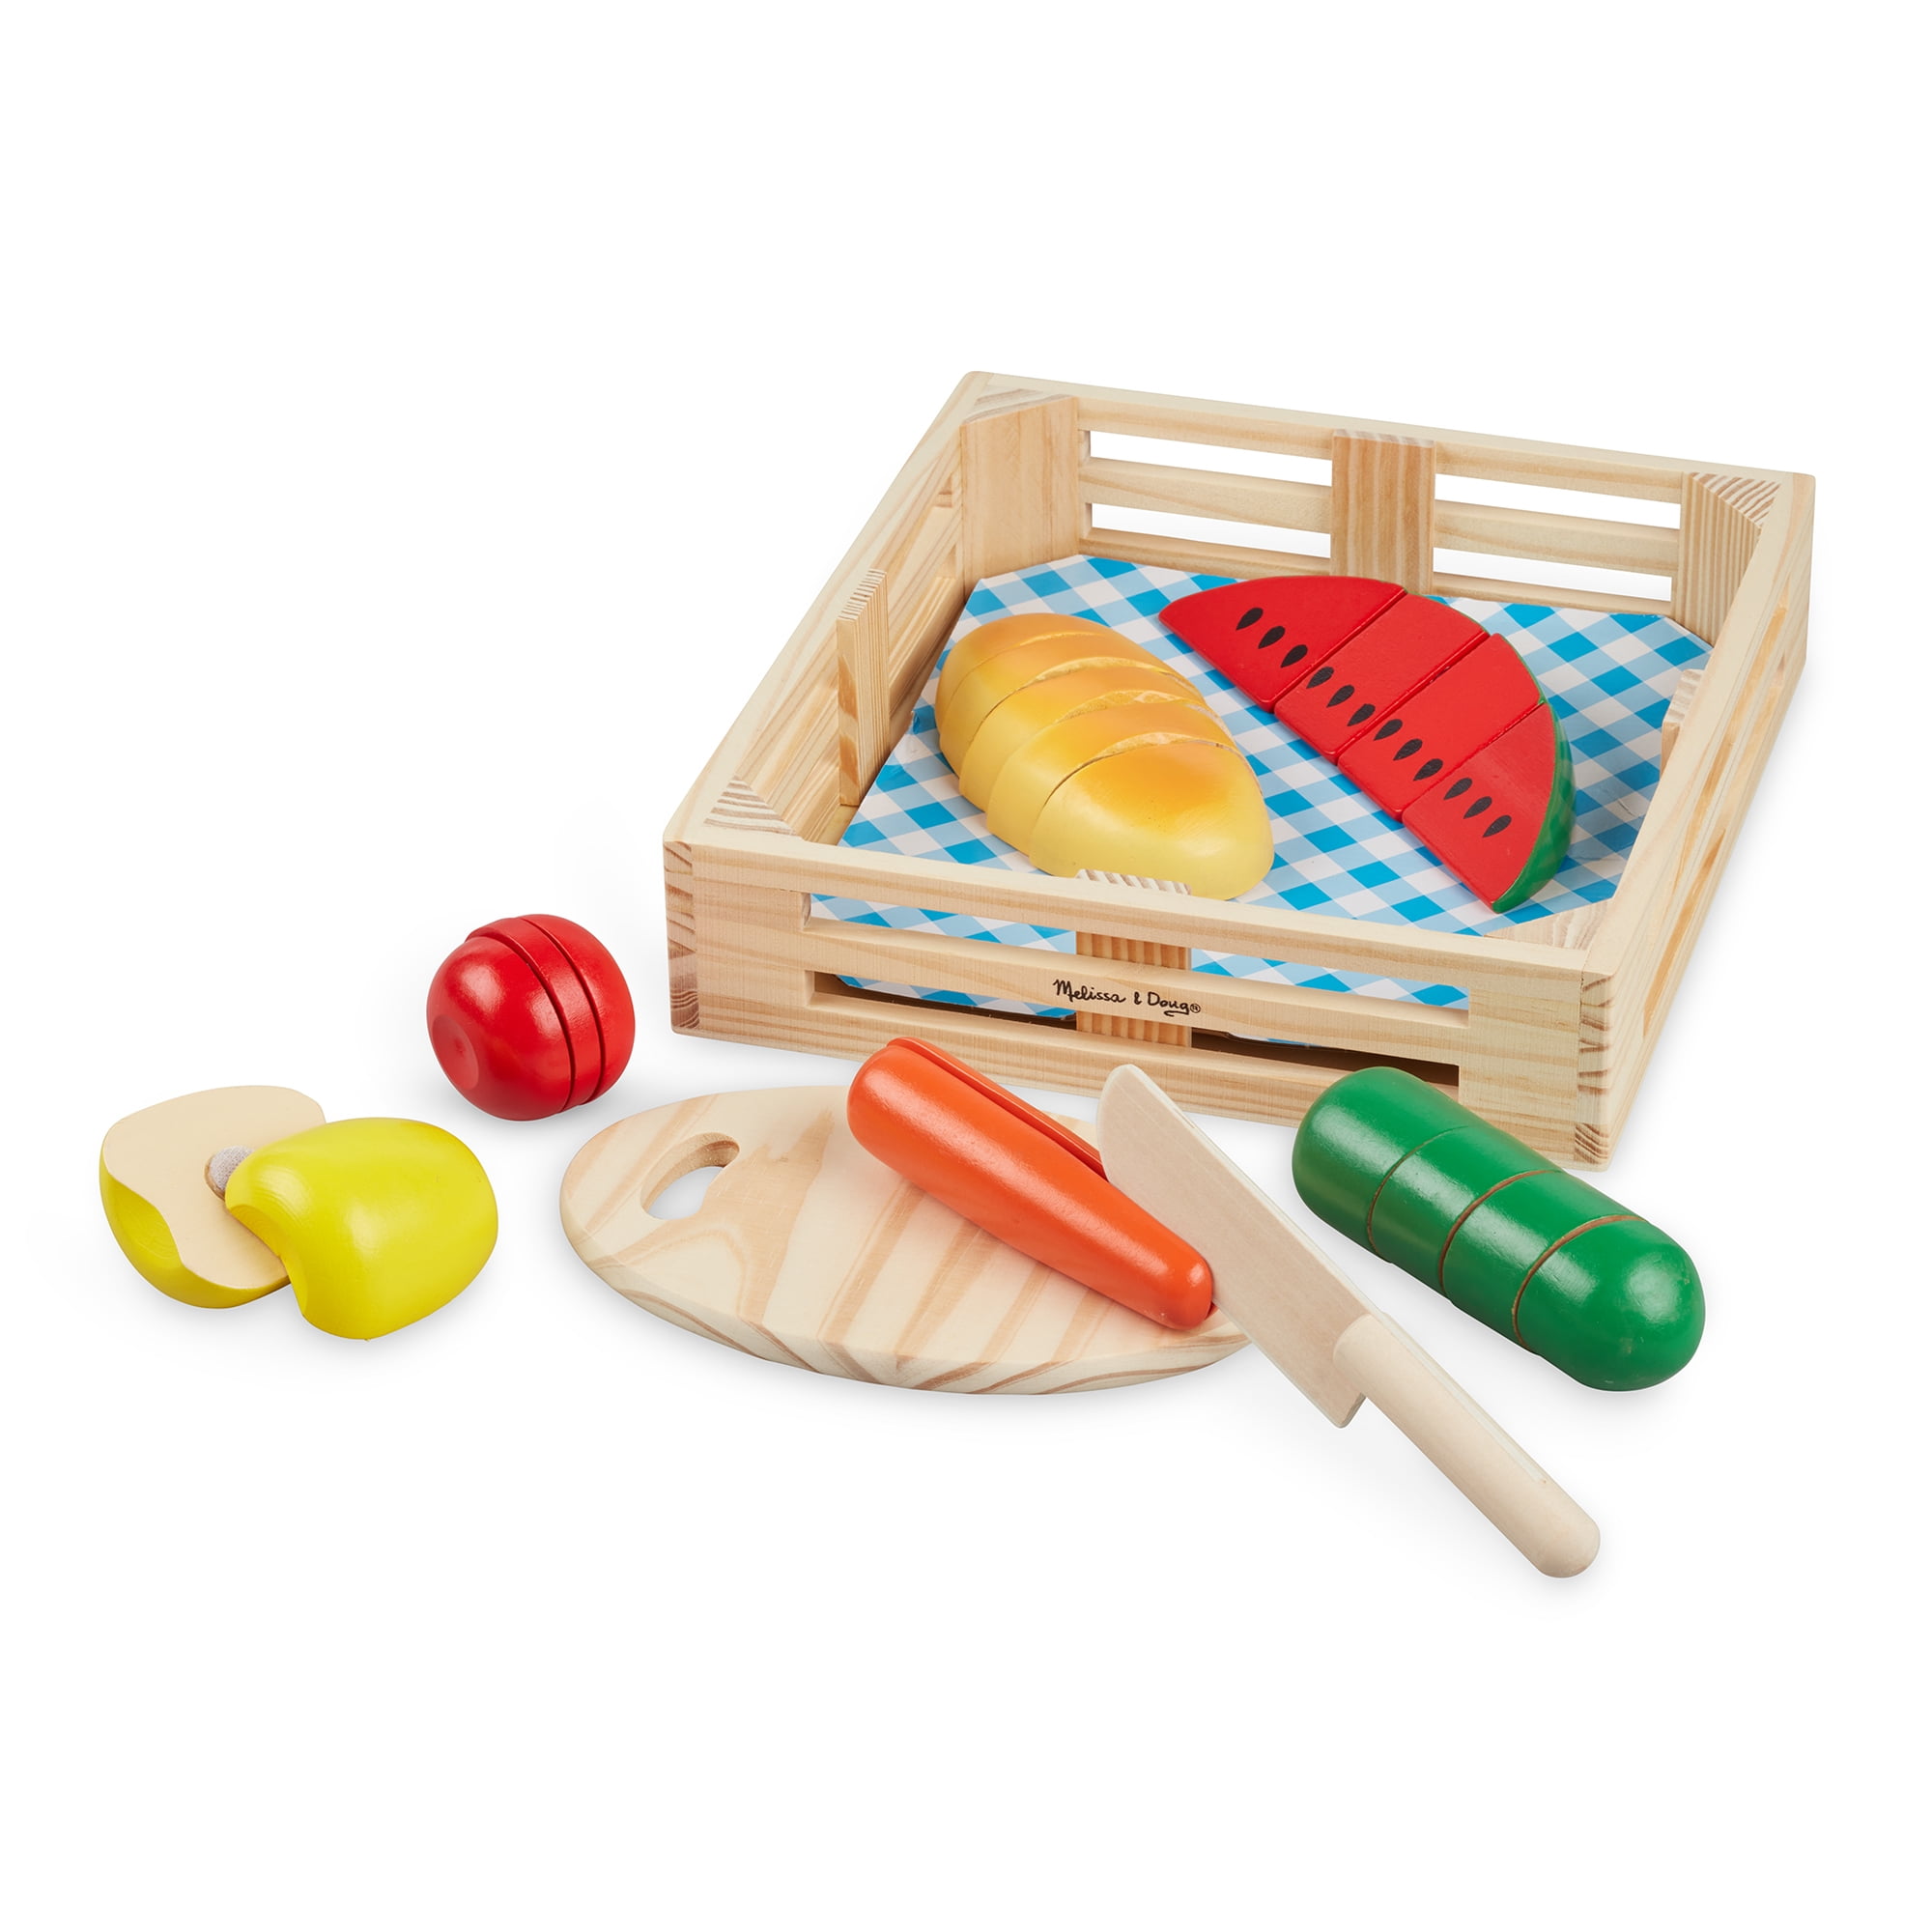 Wooden Play Food Pretend play mixed fruit in a wooden crate role play 